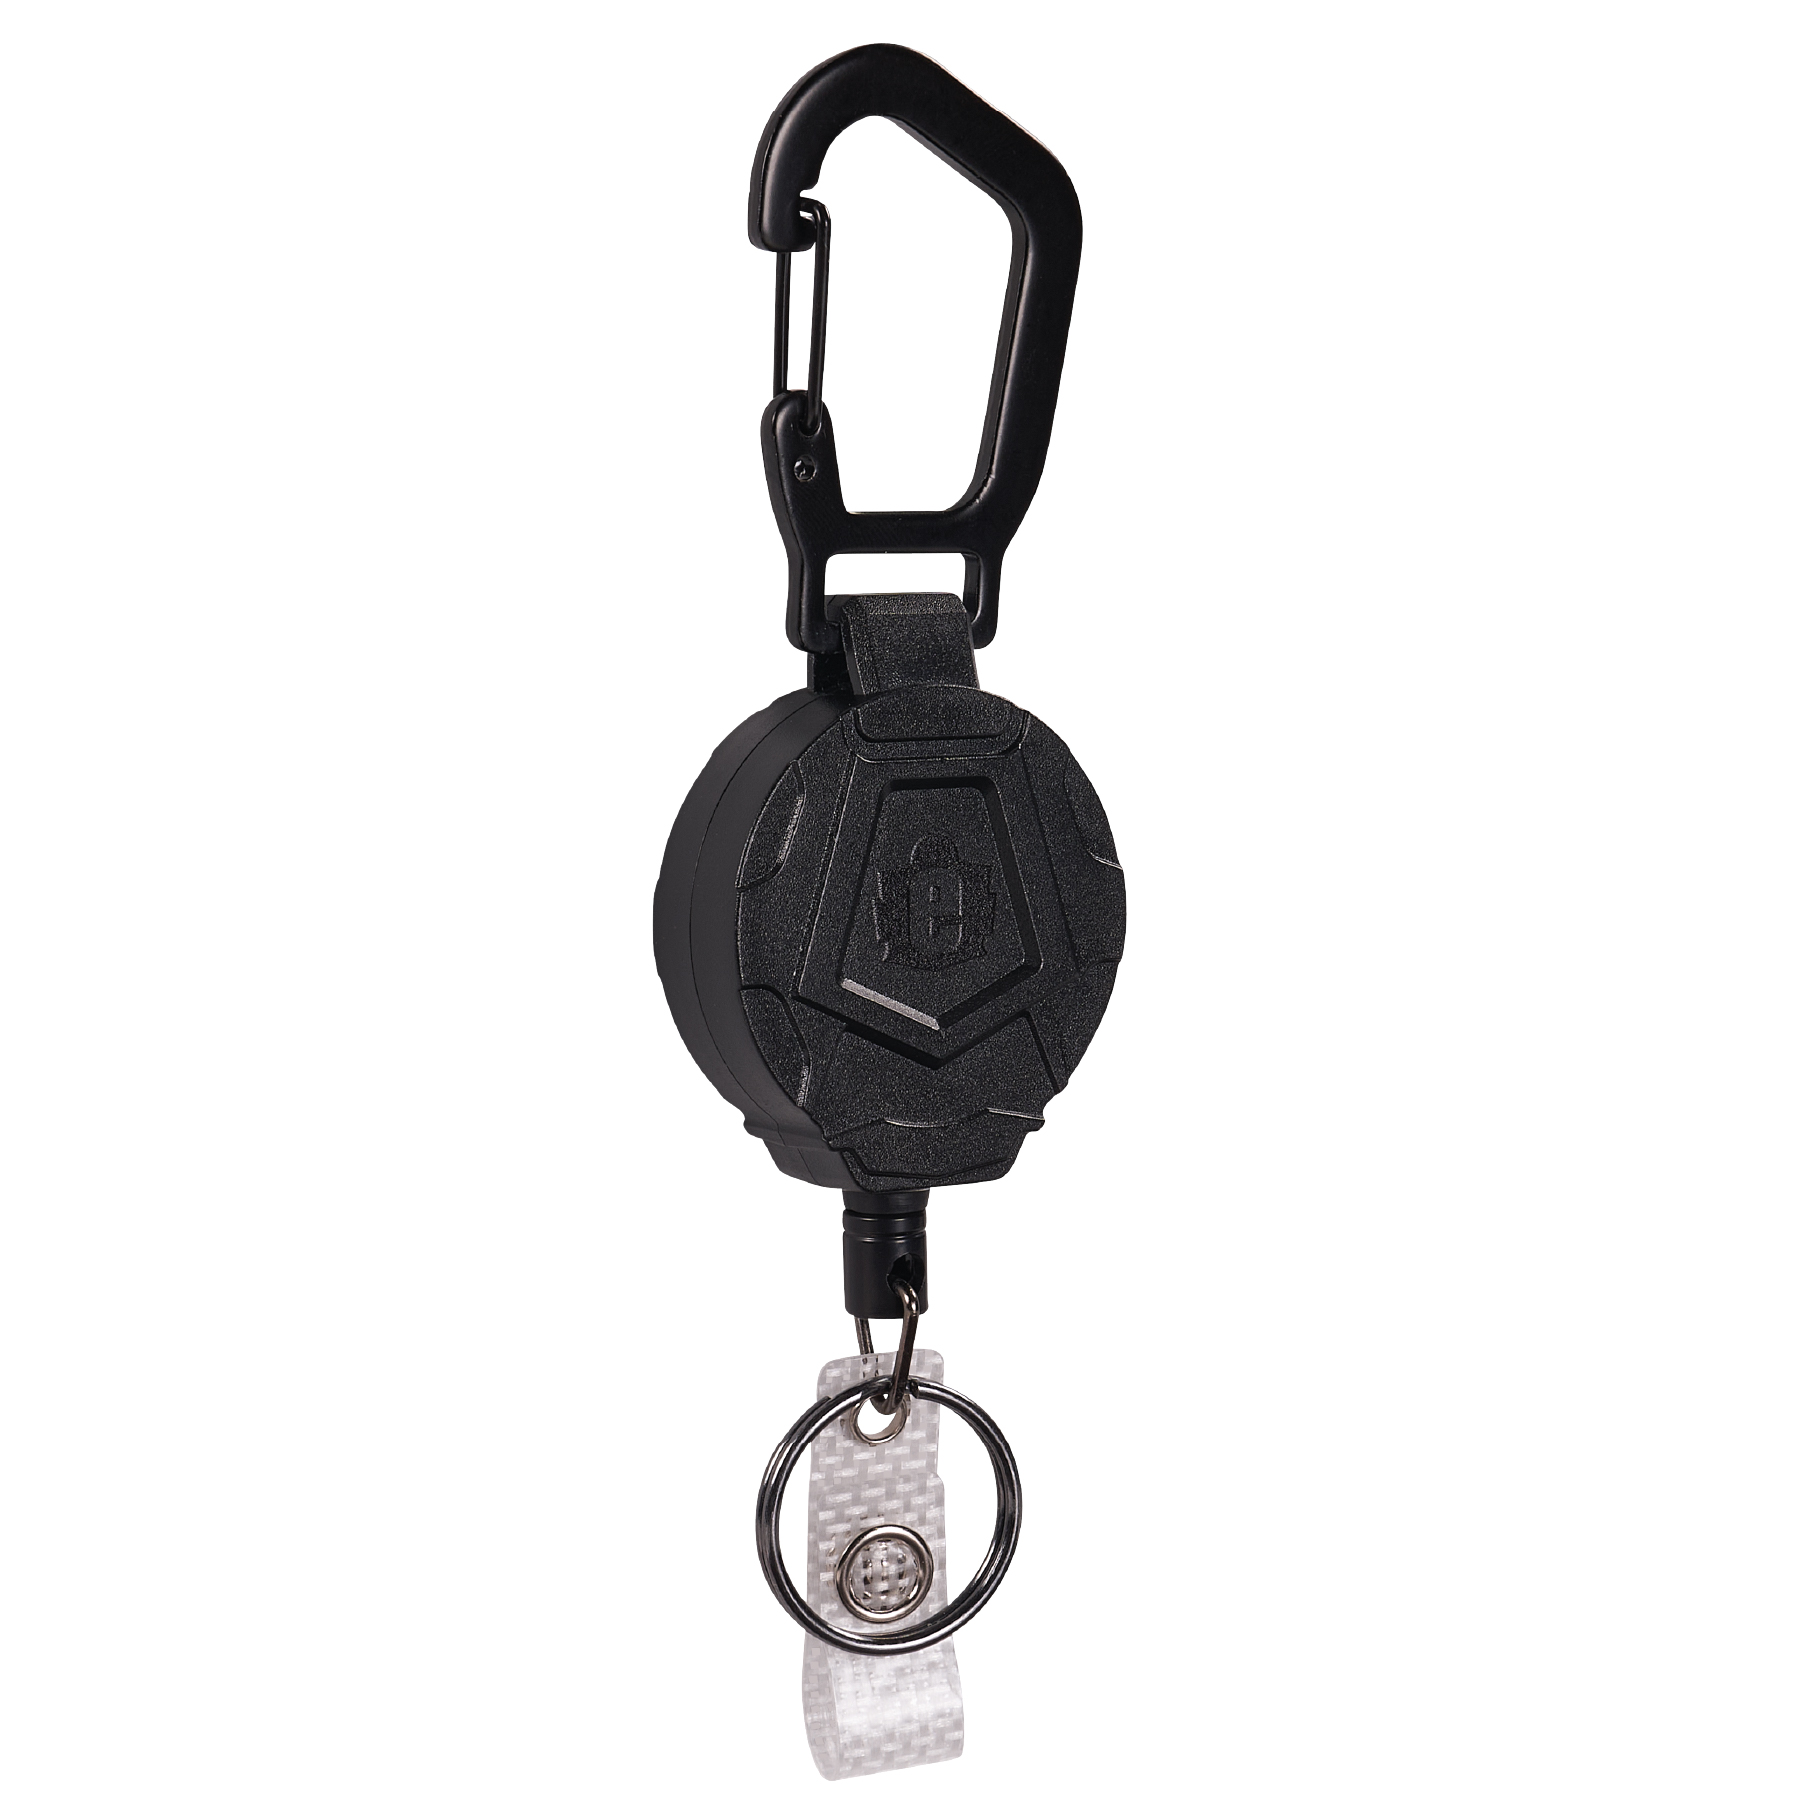 Cheap Badge Holder with Retractable Badge Reel Clip Versatile